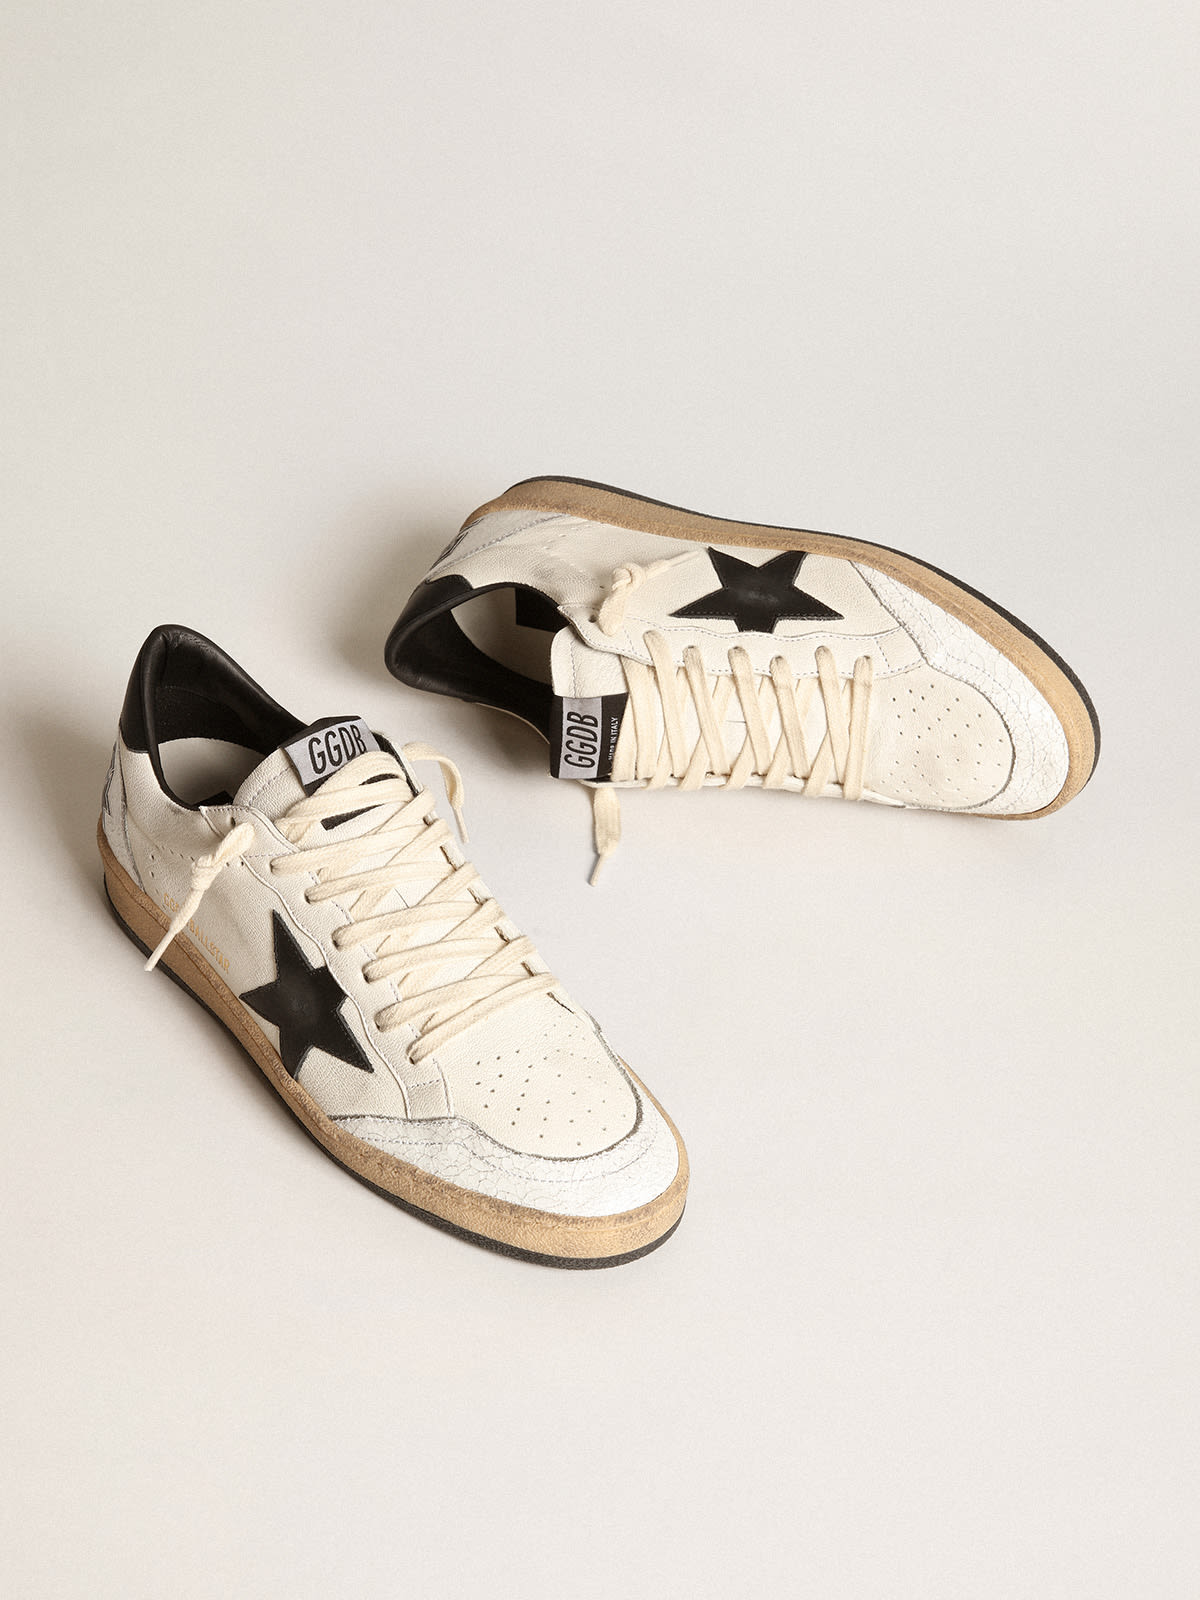 Golden Goose - Men's Ball Star sneakers in white nappa leather with black leather star and heel tab in 